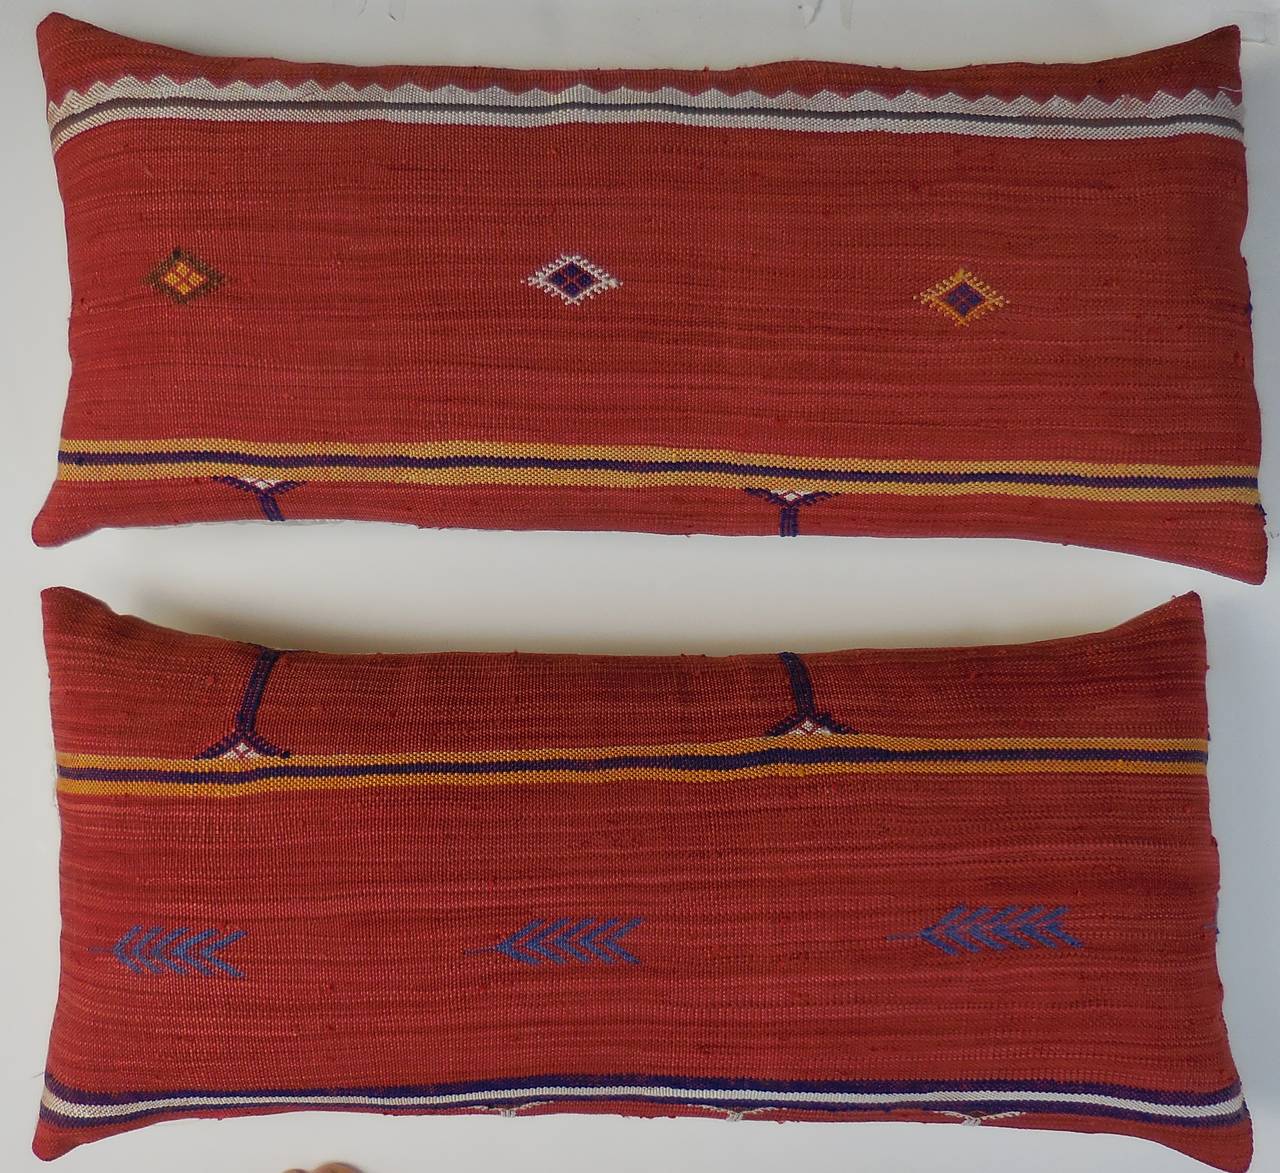 Pair of pillows ,made of hand woven rug fragment with geometric motif.
Silk backing. 
Frash inserts.